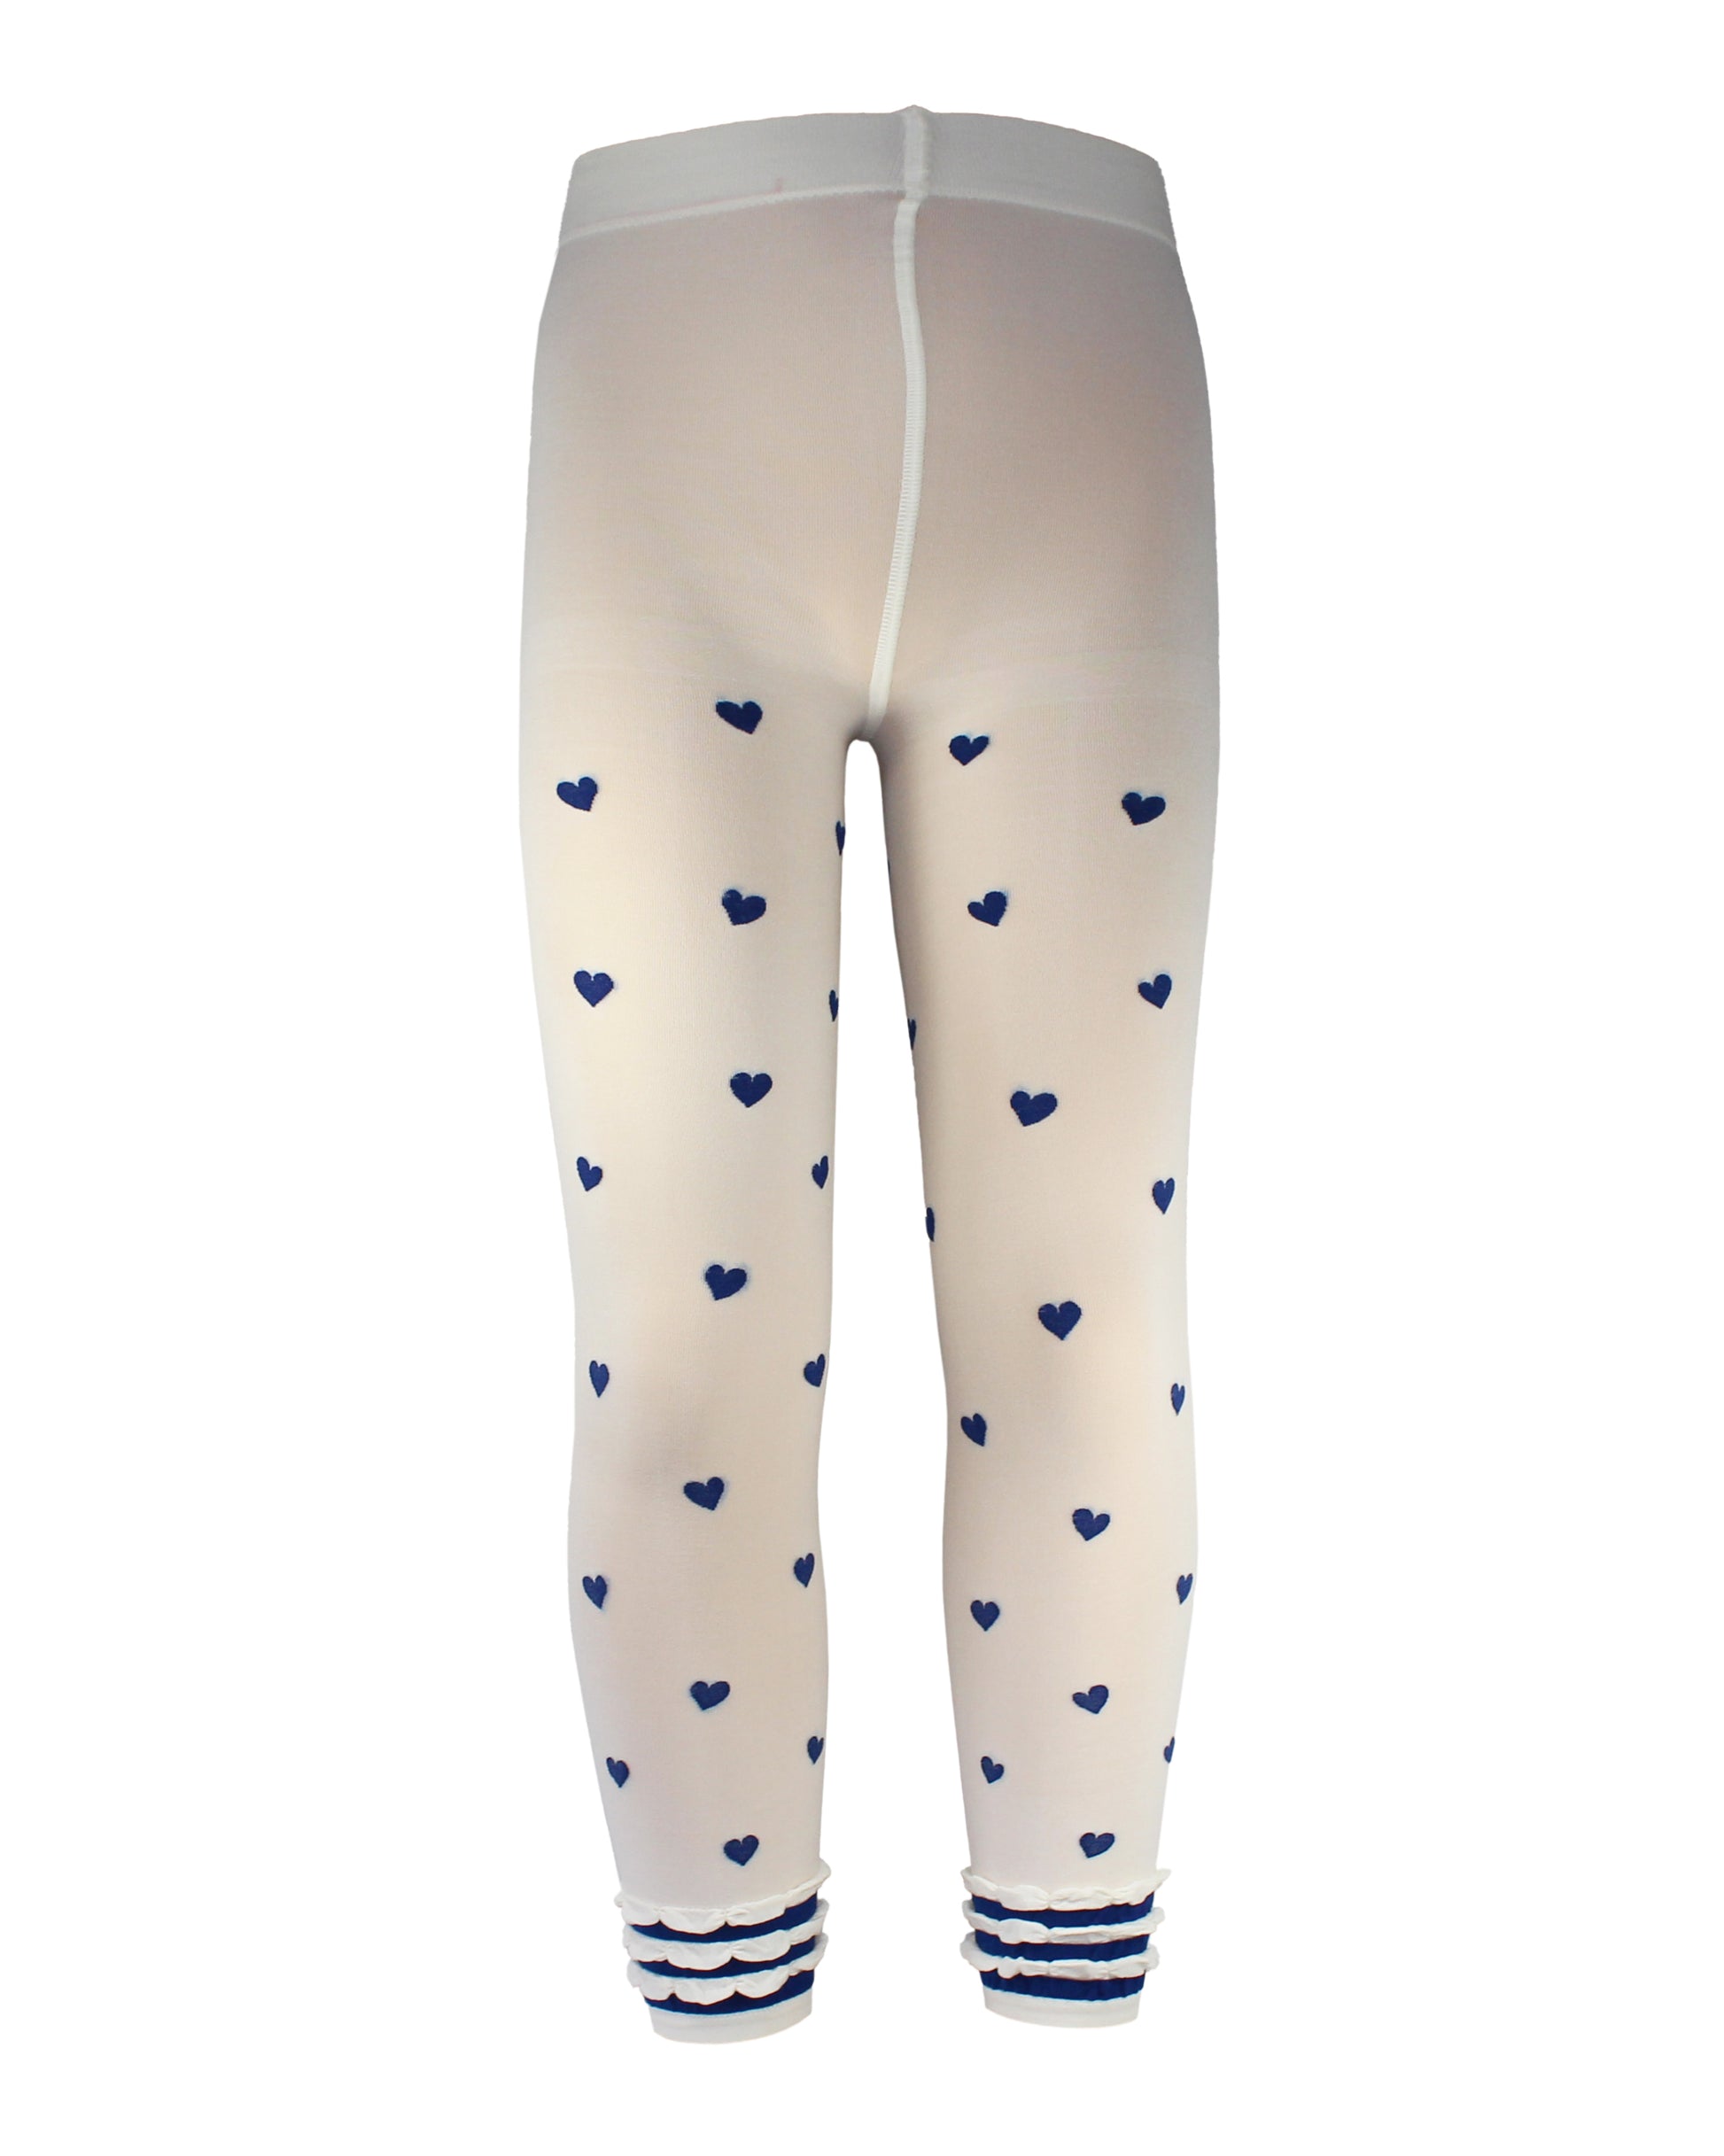 Omsa Fancy Pantacollant - Soft semi-opaque ivory cream kid's footless tights with an all over woven heart pattern in navy with a ruched striped cuff.